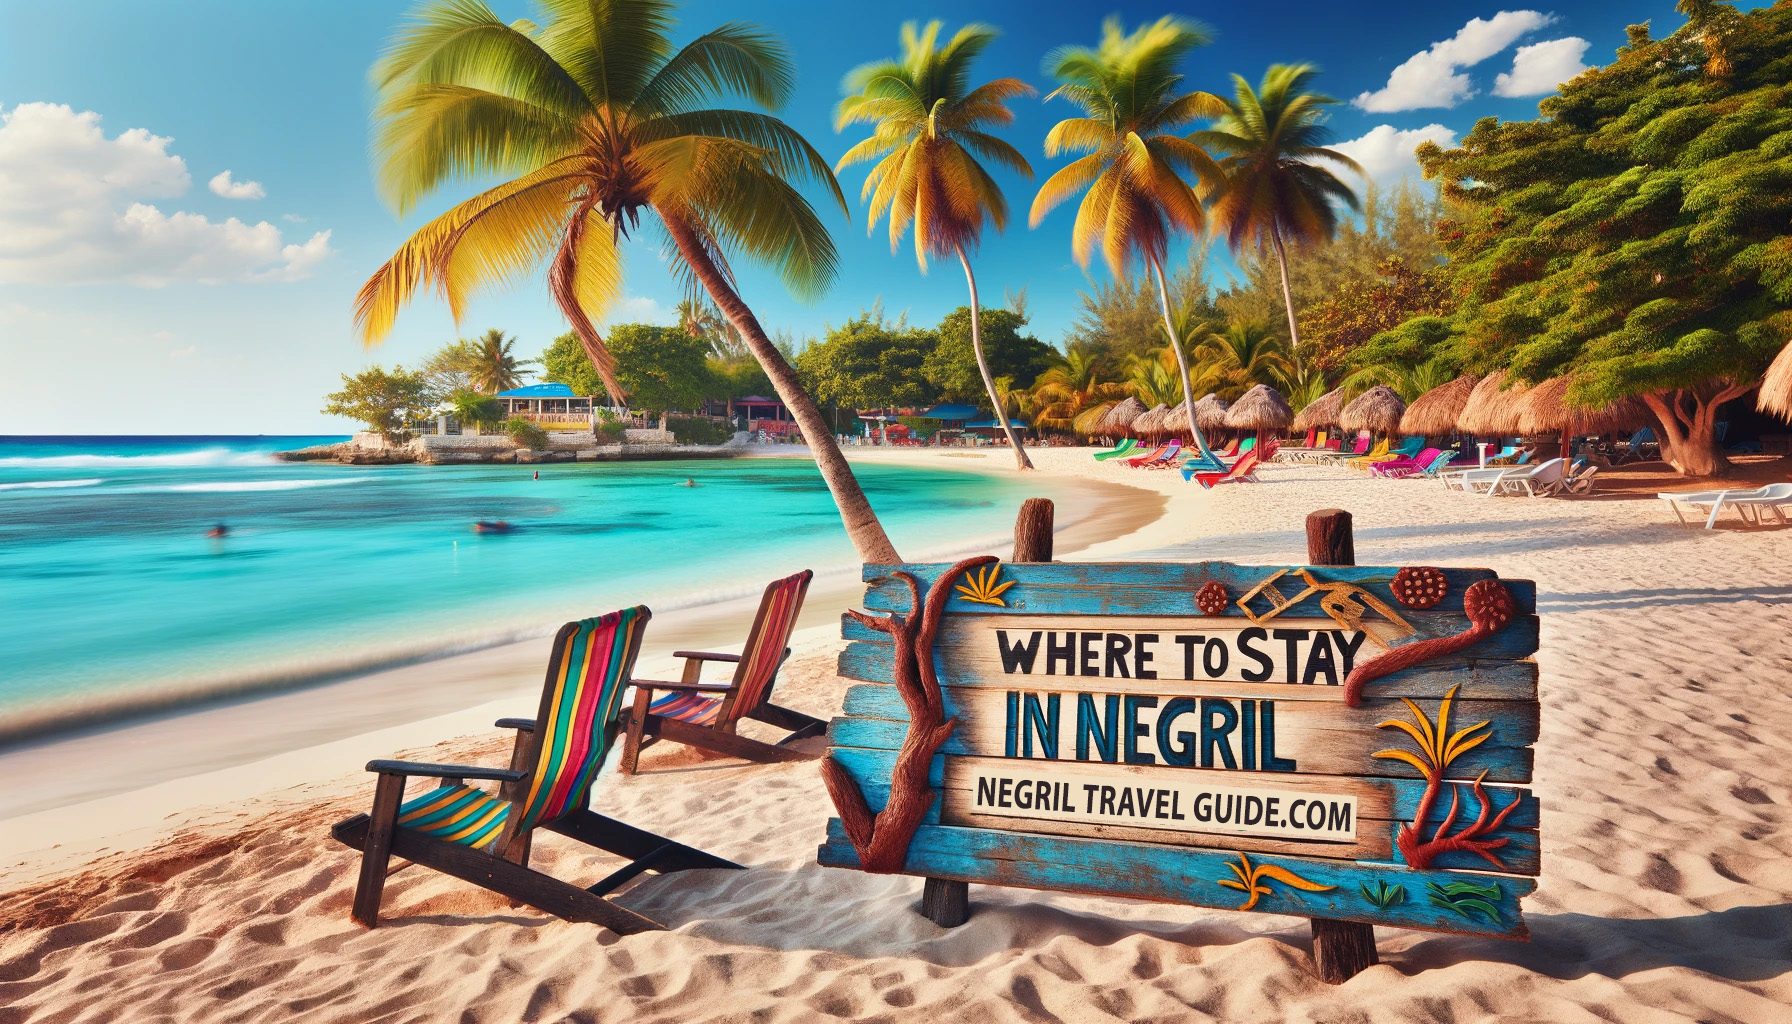 Where To Stay in Negril - Negril Travel Guide